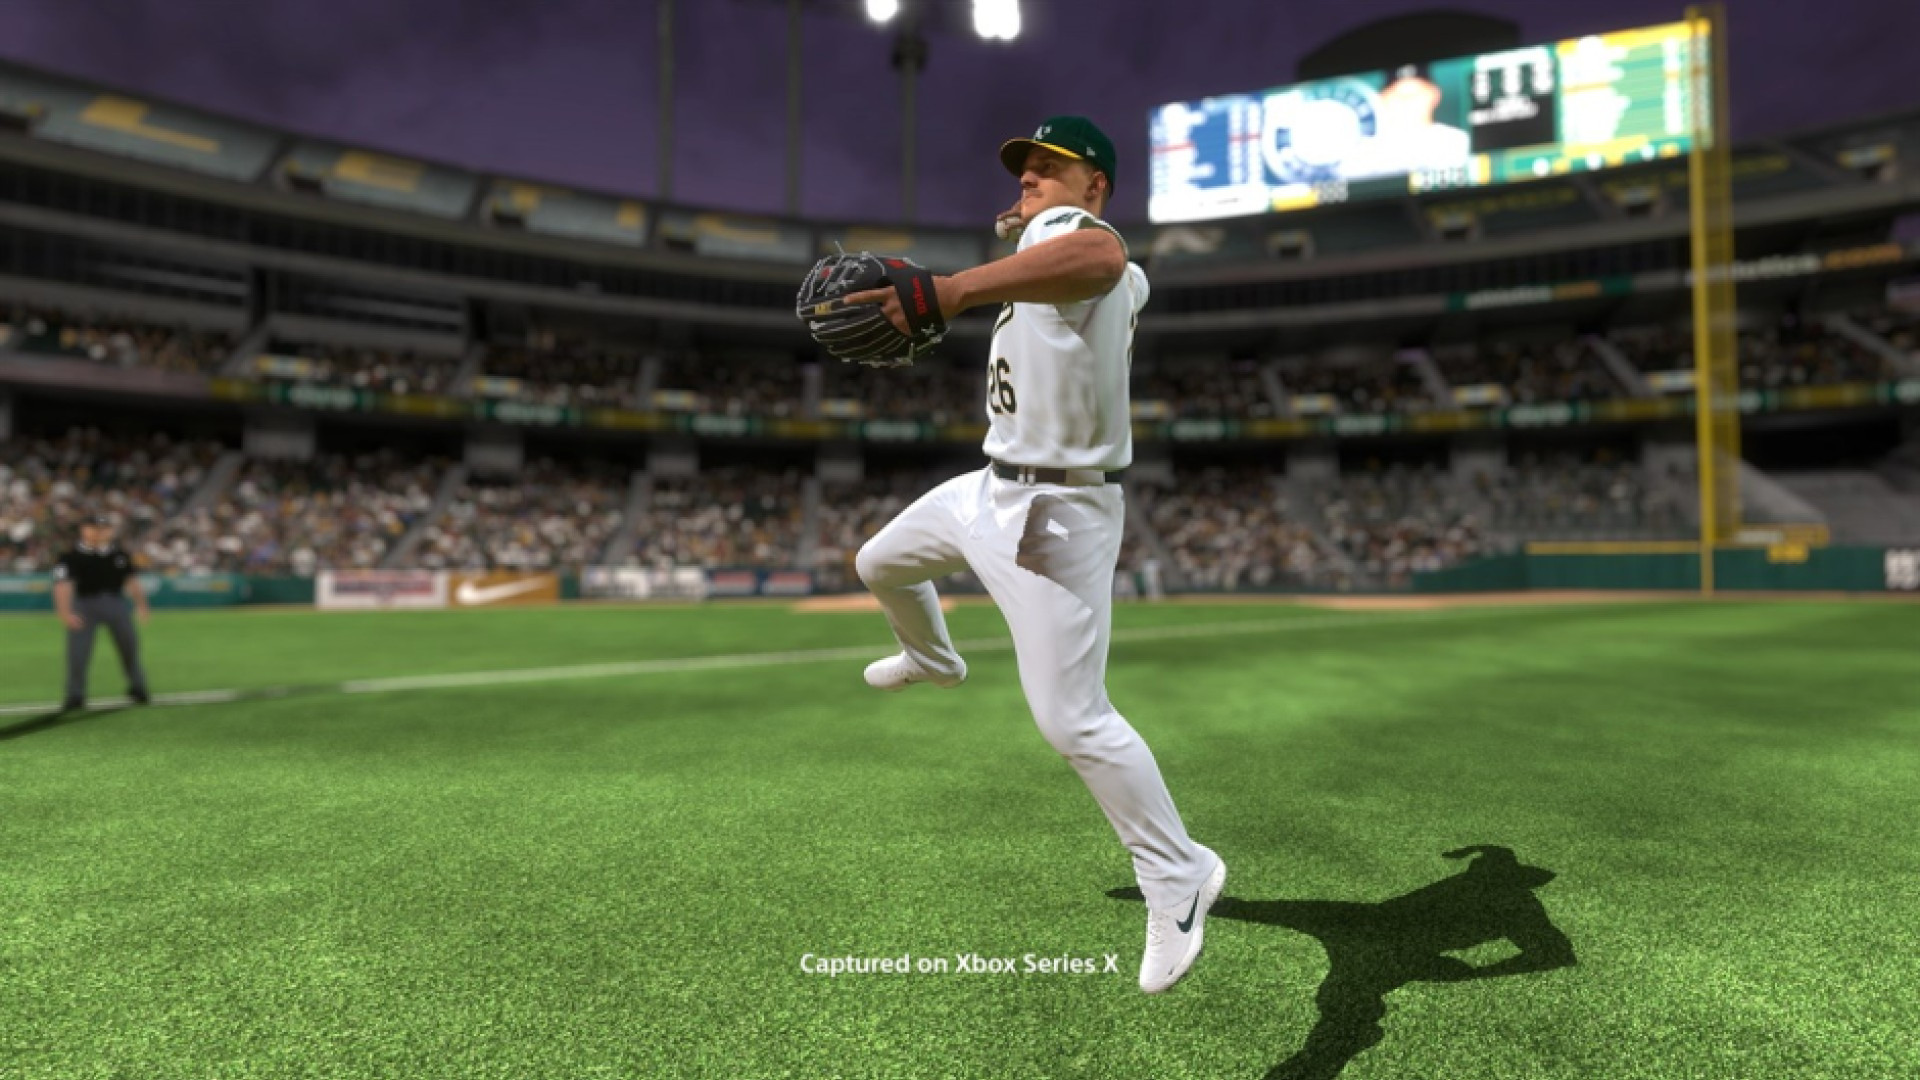 MLB The Show 21 Digital Deluxe Edition - April 16 - Optimized for Xbox Series X |  S